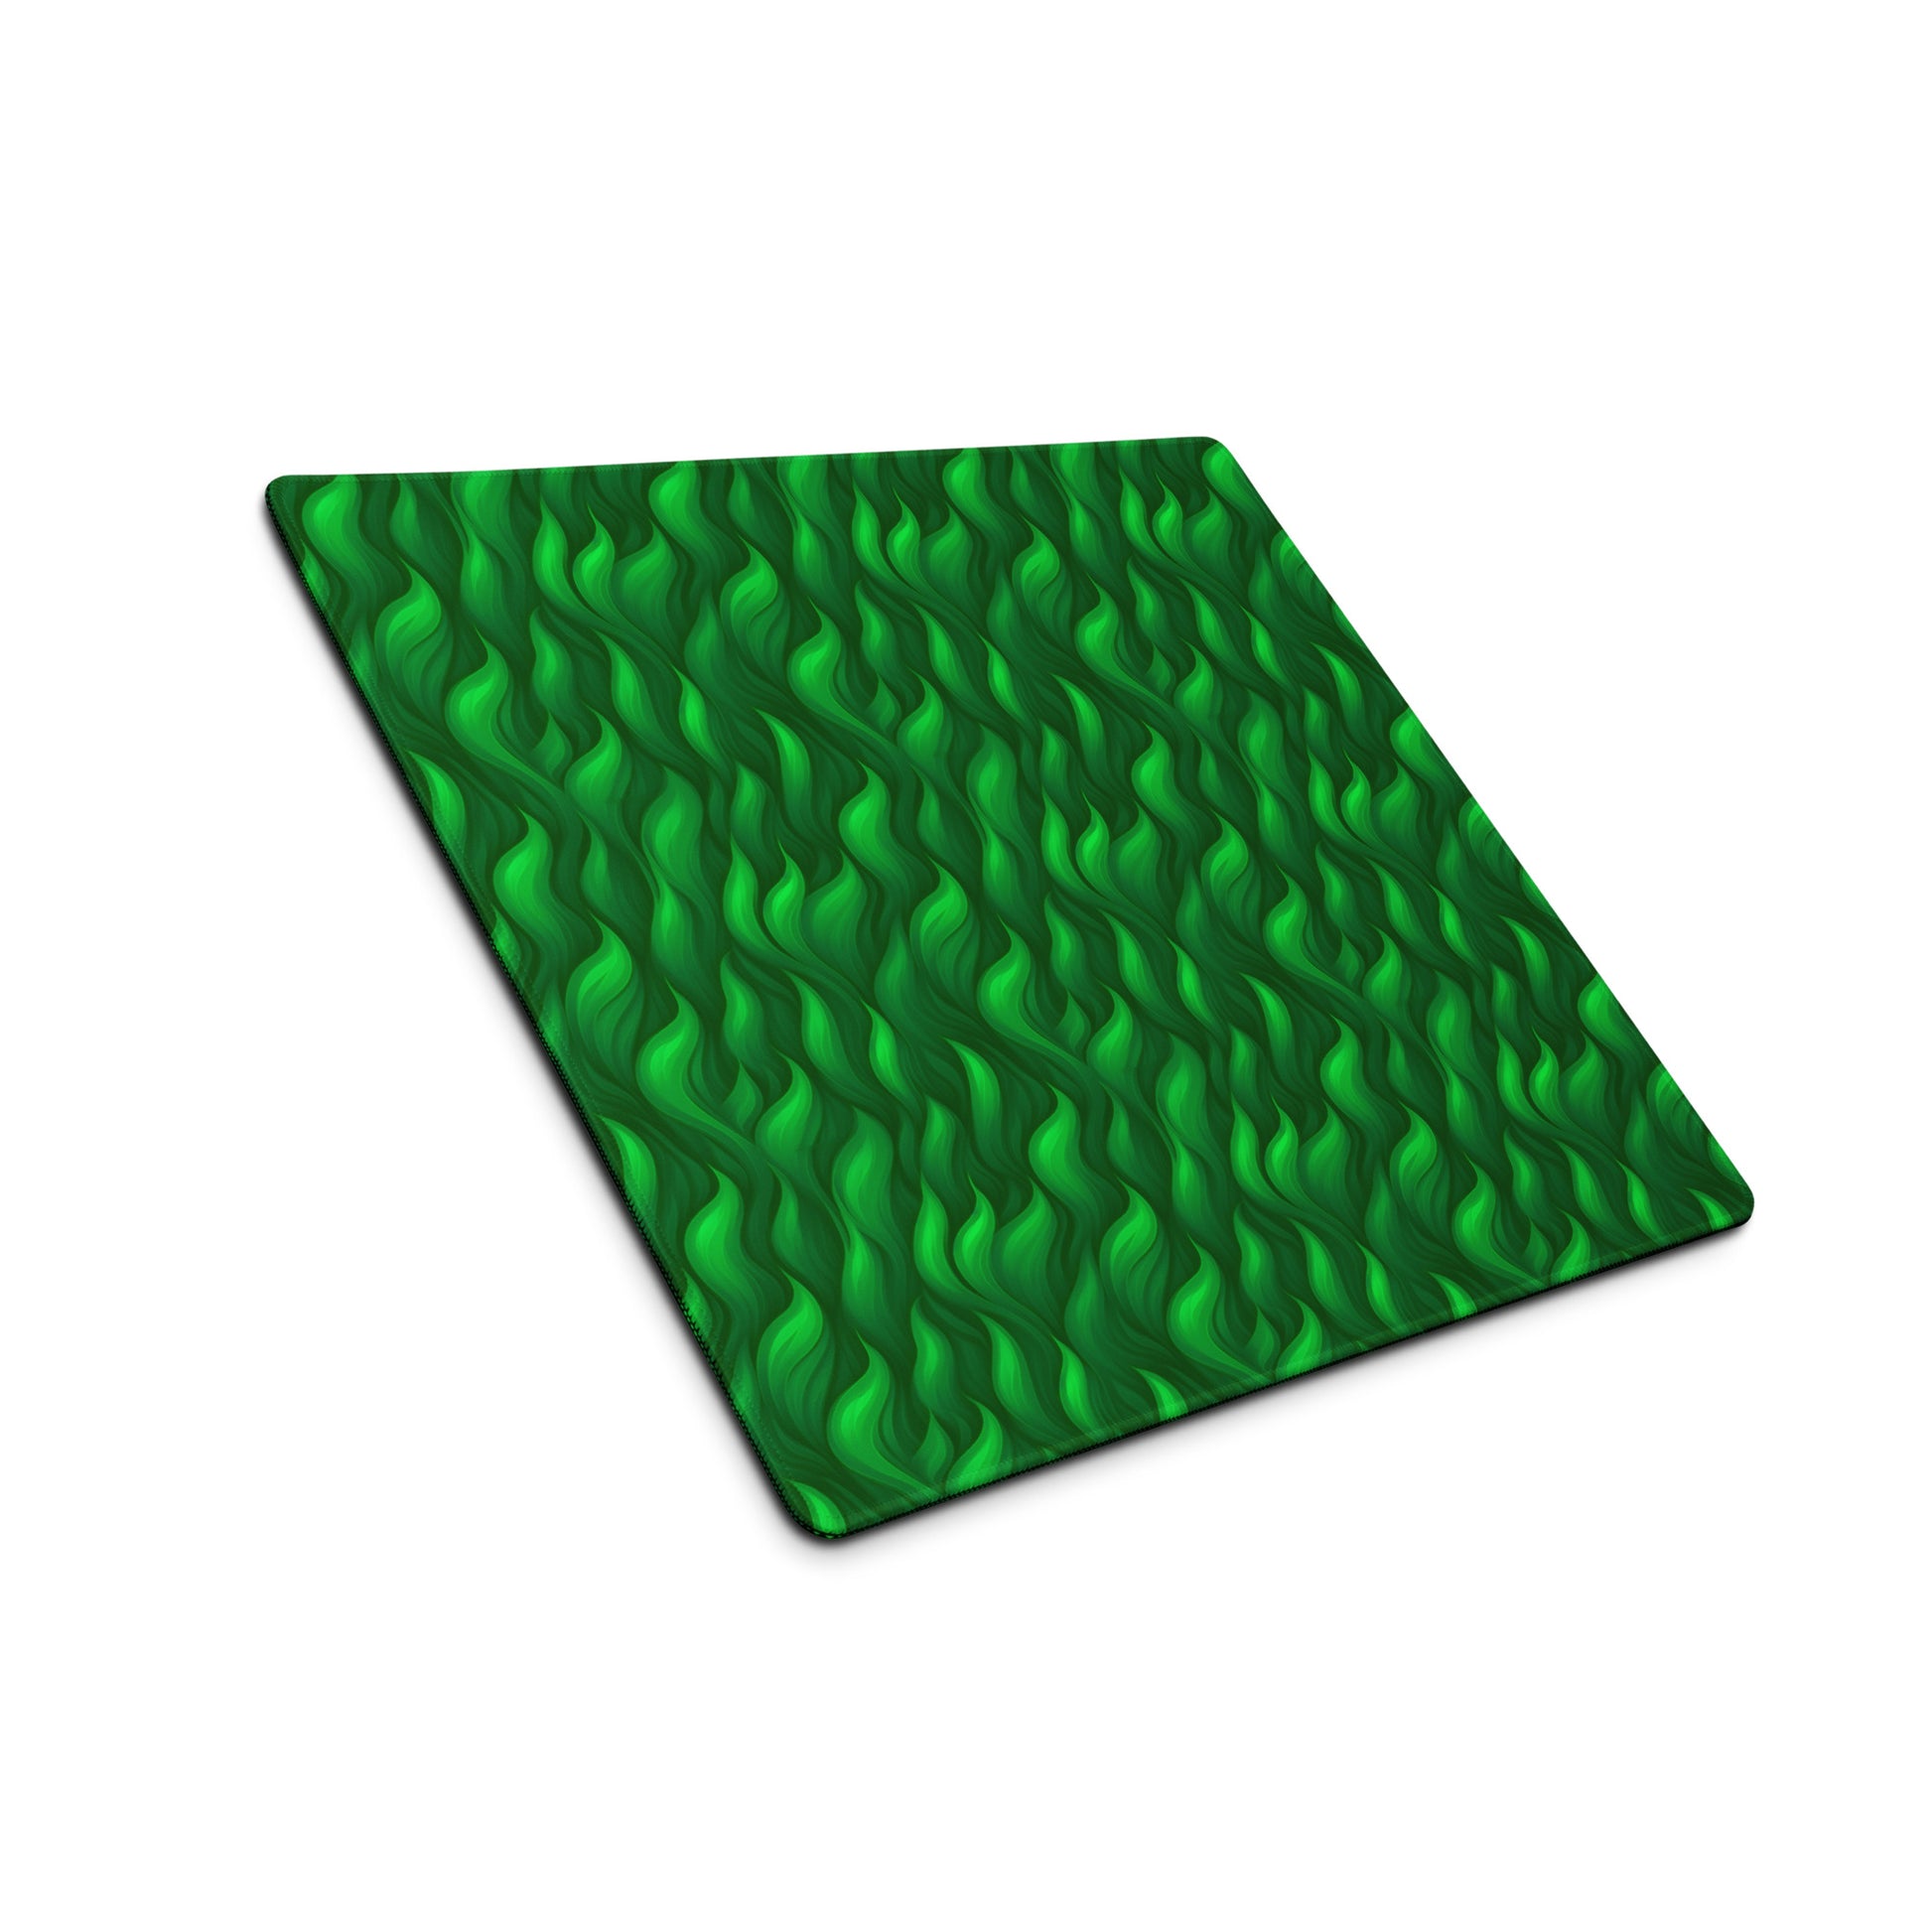 A 18" x 16" desk pad with a wavy flame pattern on it shown at an angle. Green in color.